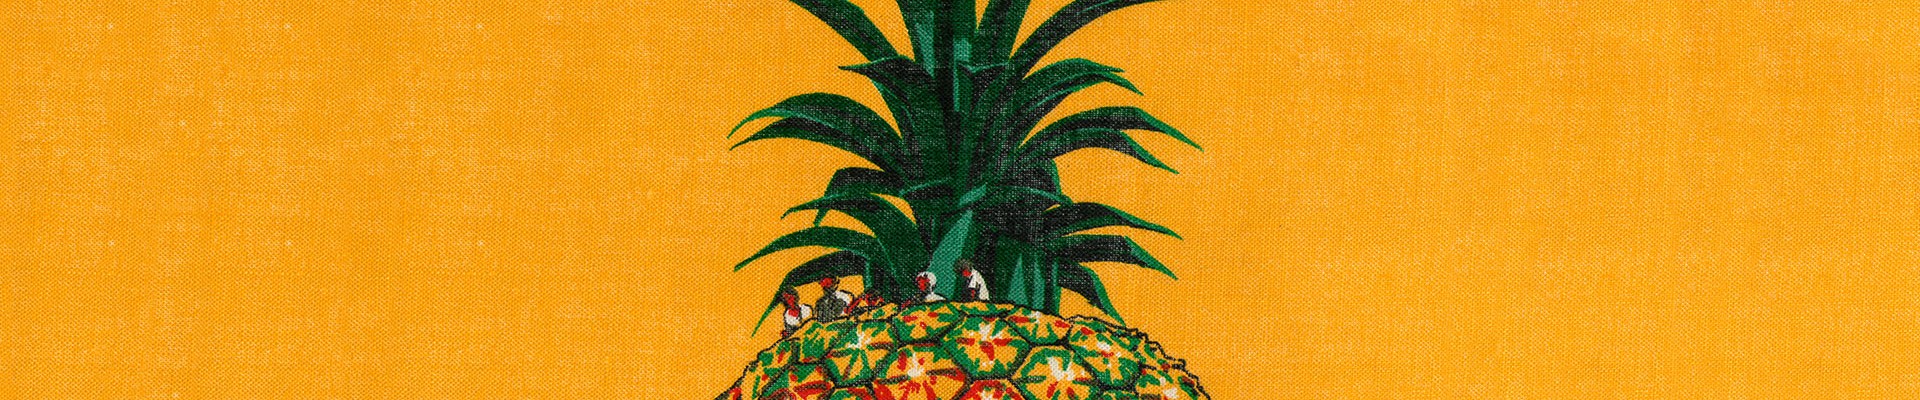 Crop of tourist tea towel featuring the Big Pineapple on an orange background 